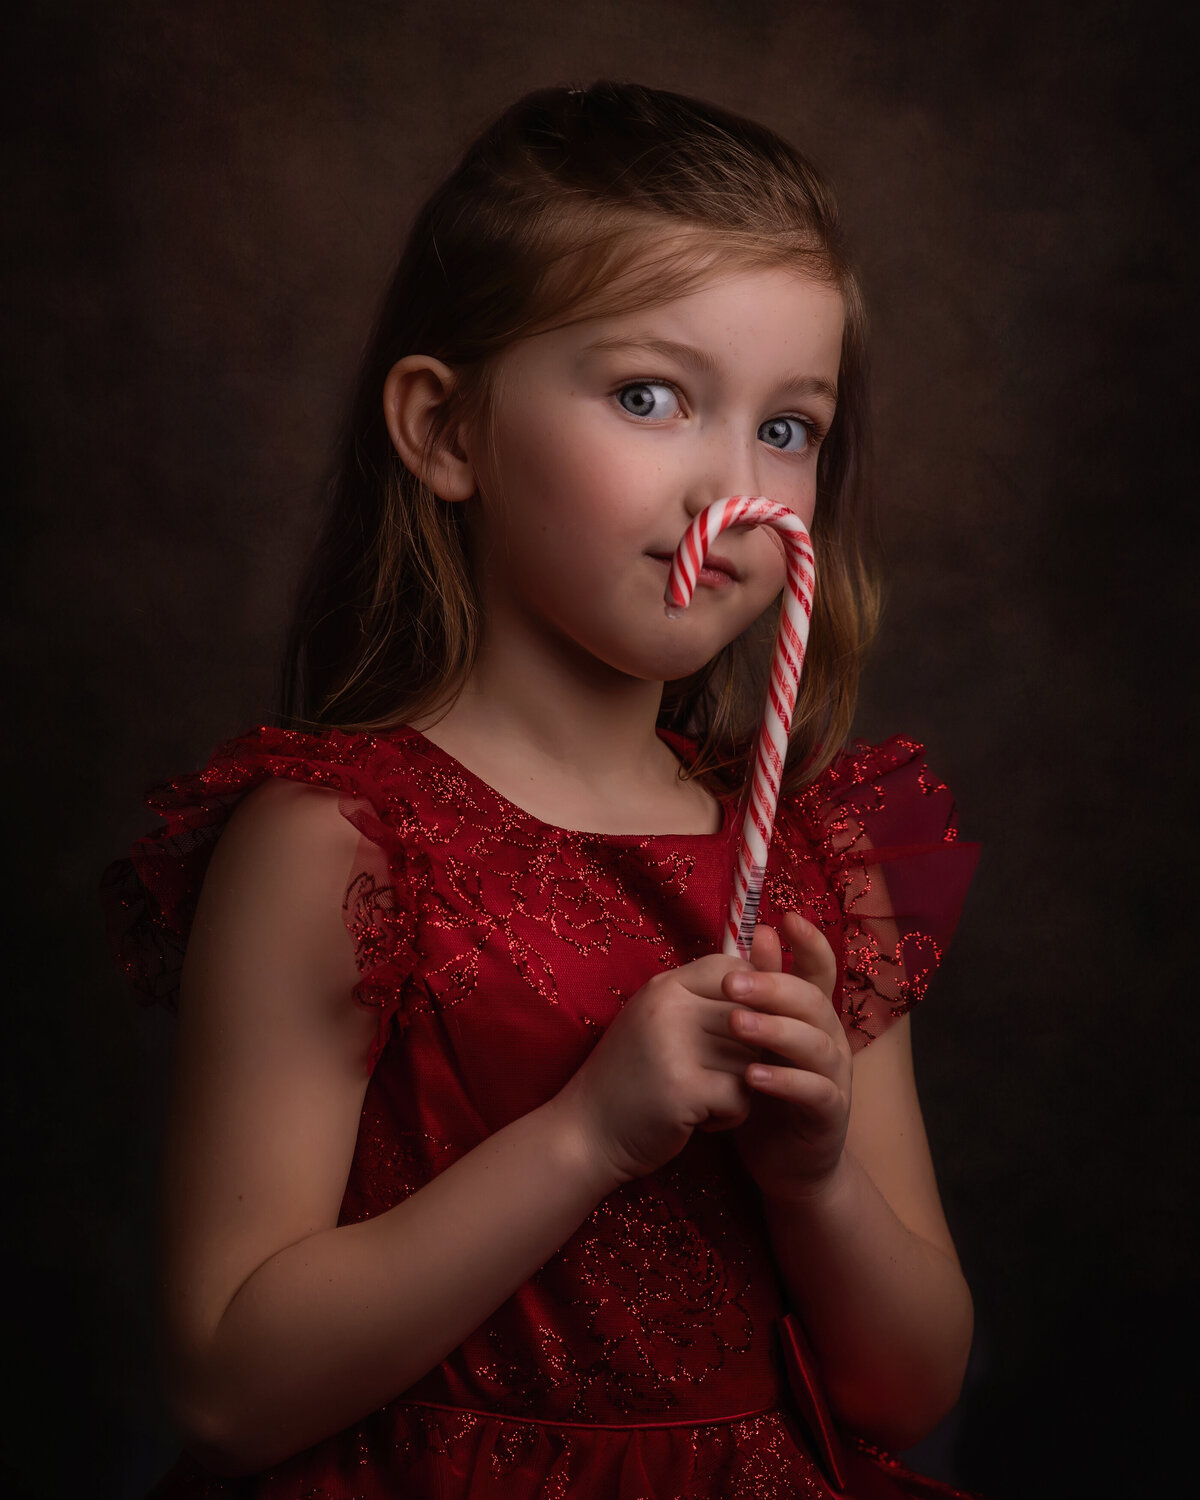 Girl-with-candy-cane